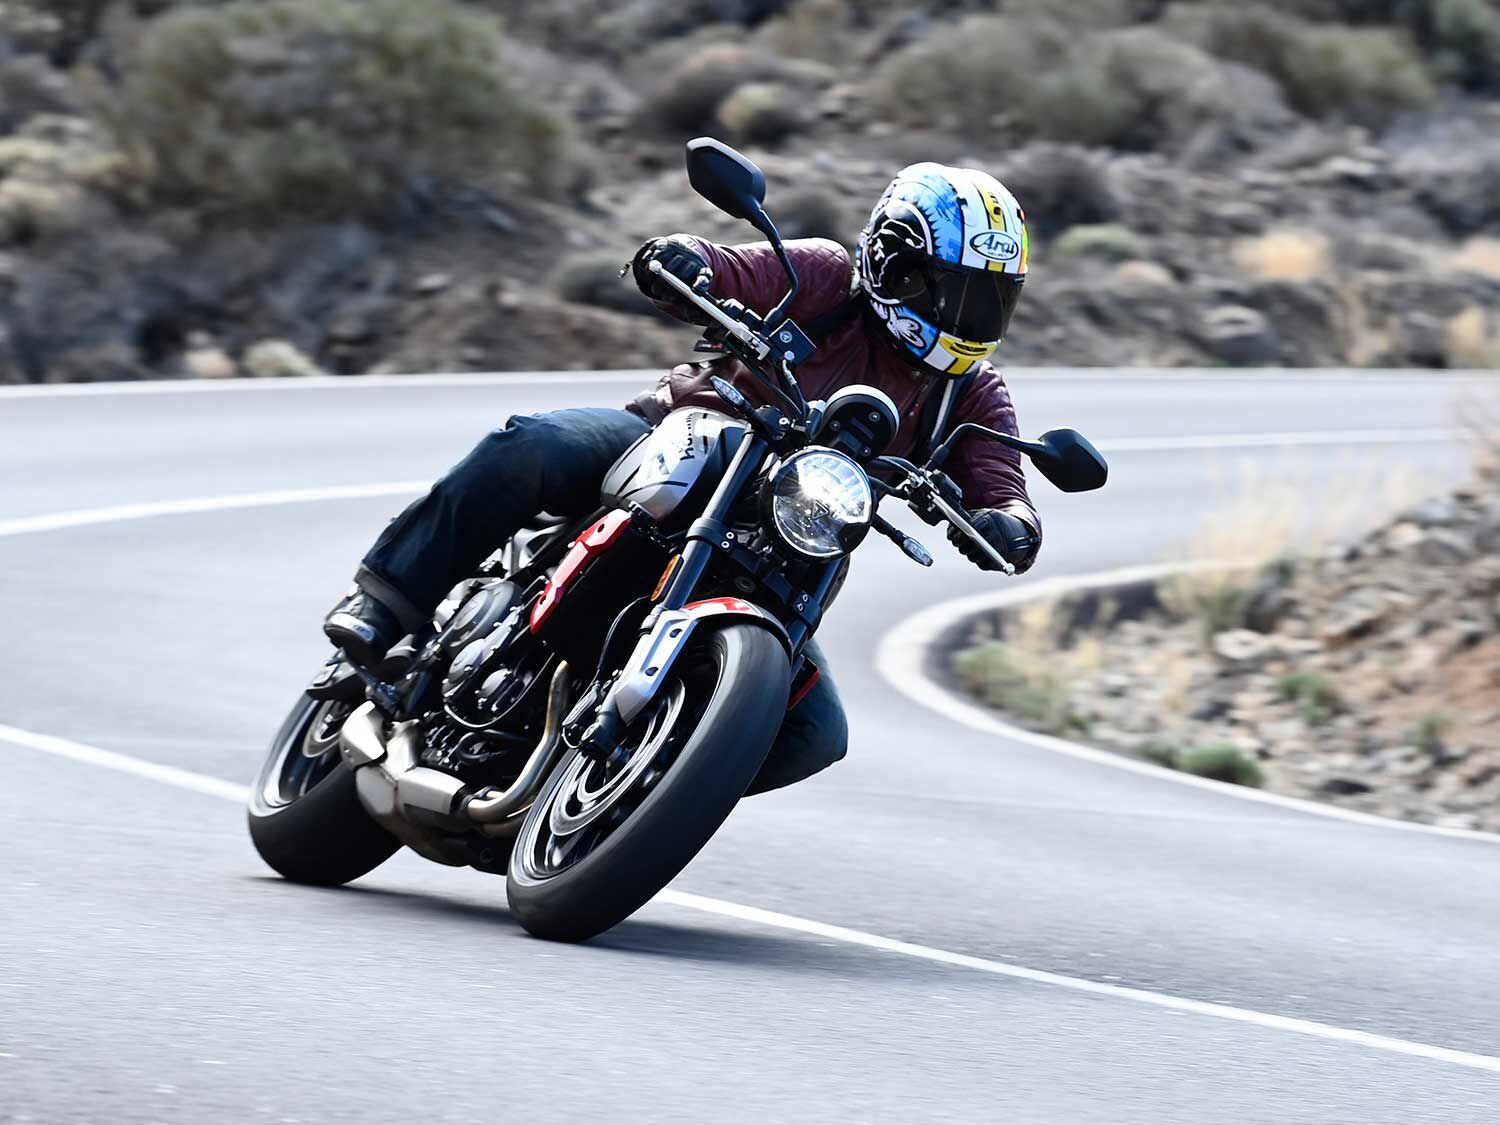 The 660cc triple engine features 67 new components over the sportier Street Triple S. Peak power is 80 hp at 10,250 rpm and torque 47 pound-feet at 6,250 rpm, so there is more low-end and midrange power than the S.